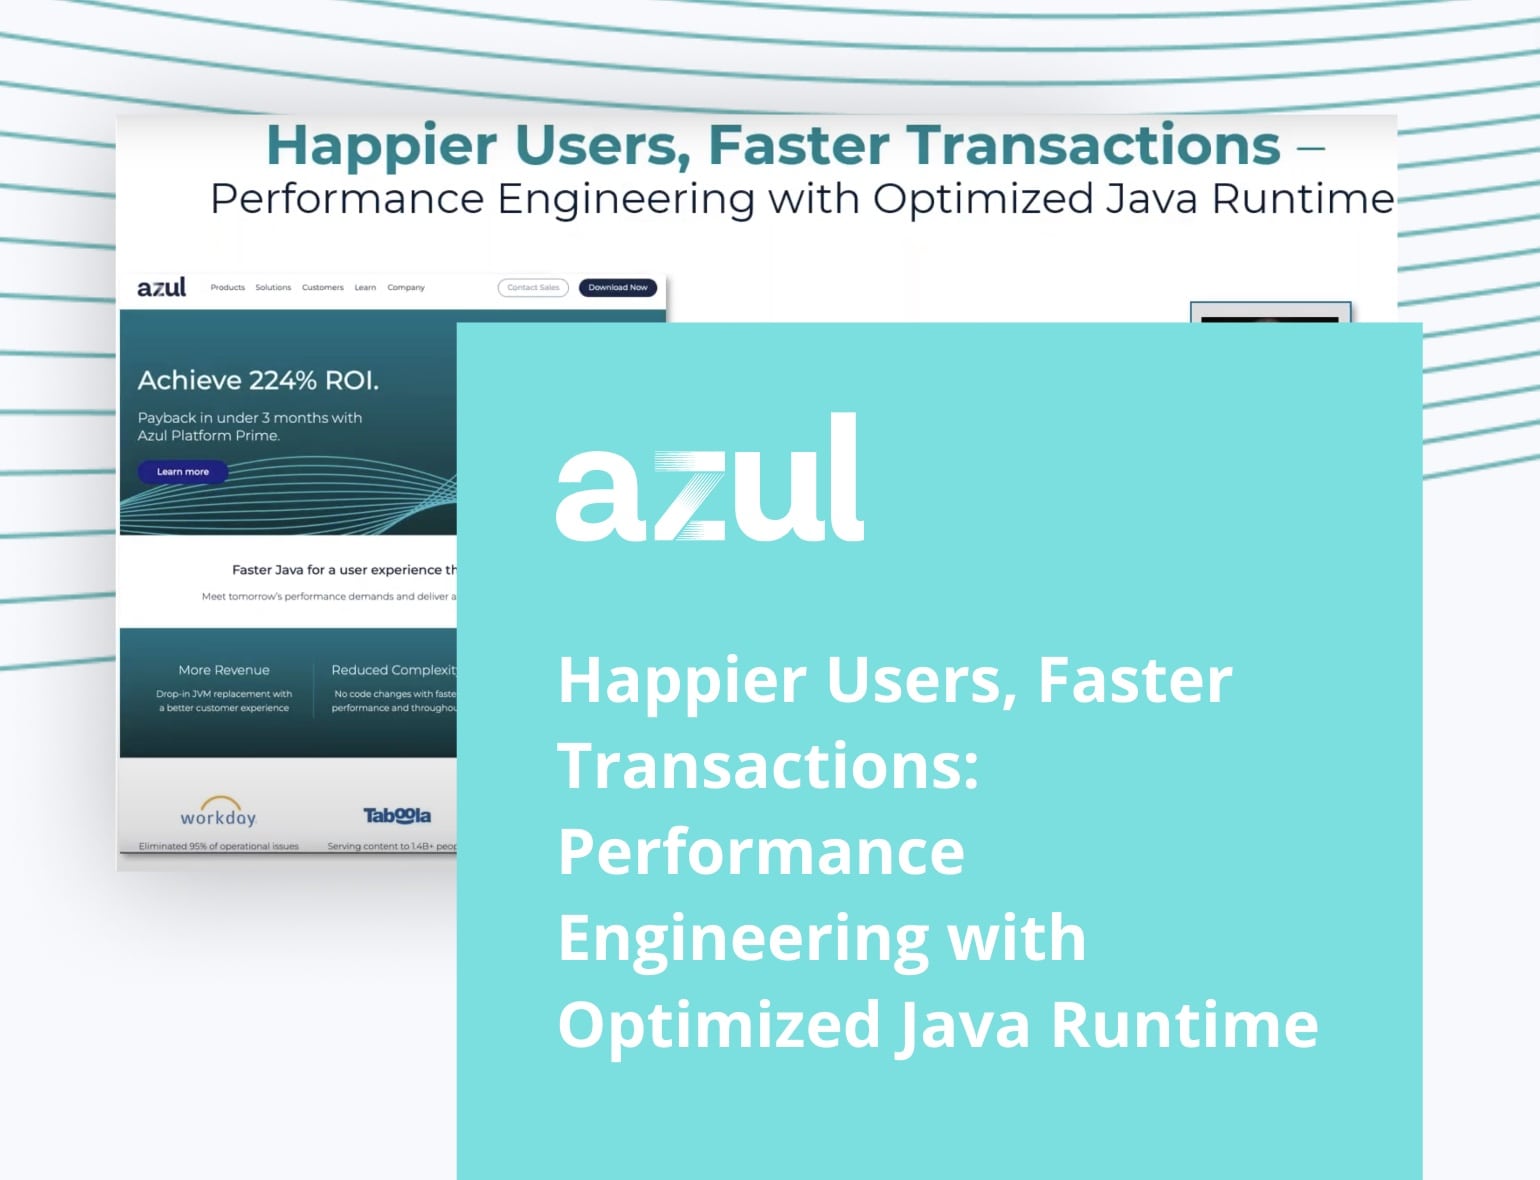 Happier Users, Faster Transactions – Performance Engineering with Optimized Java Runtime Webinar